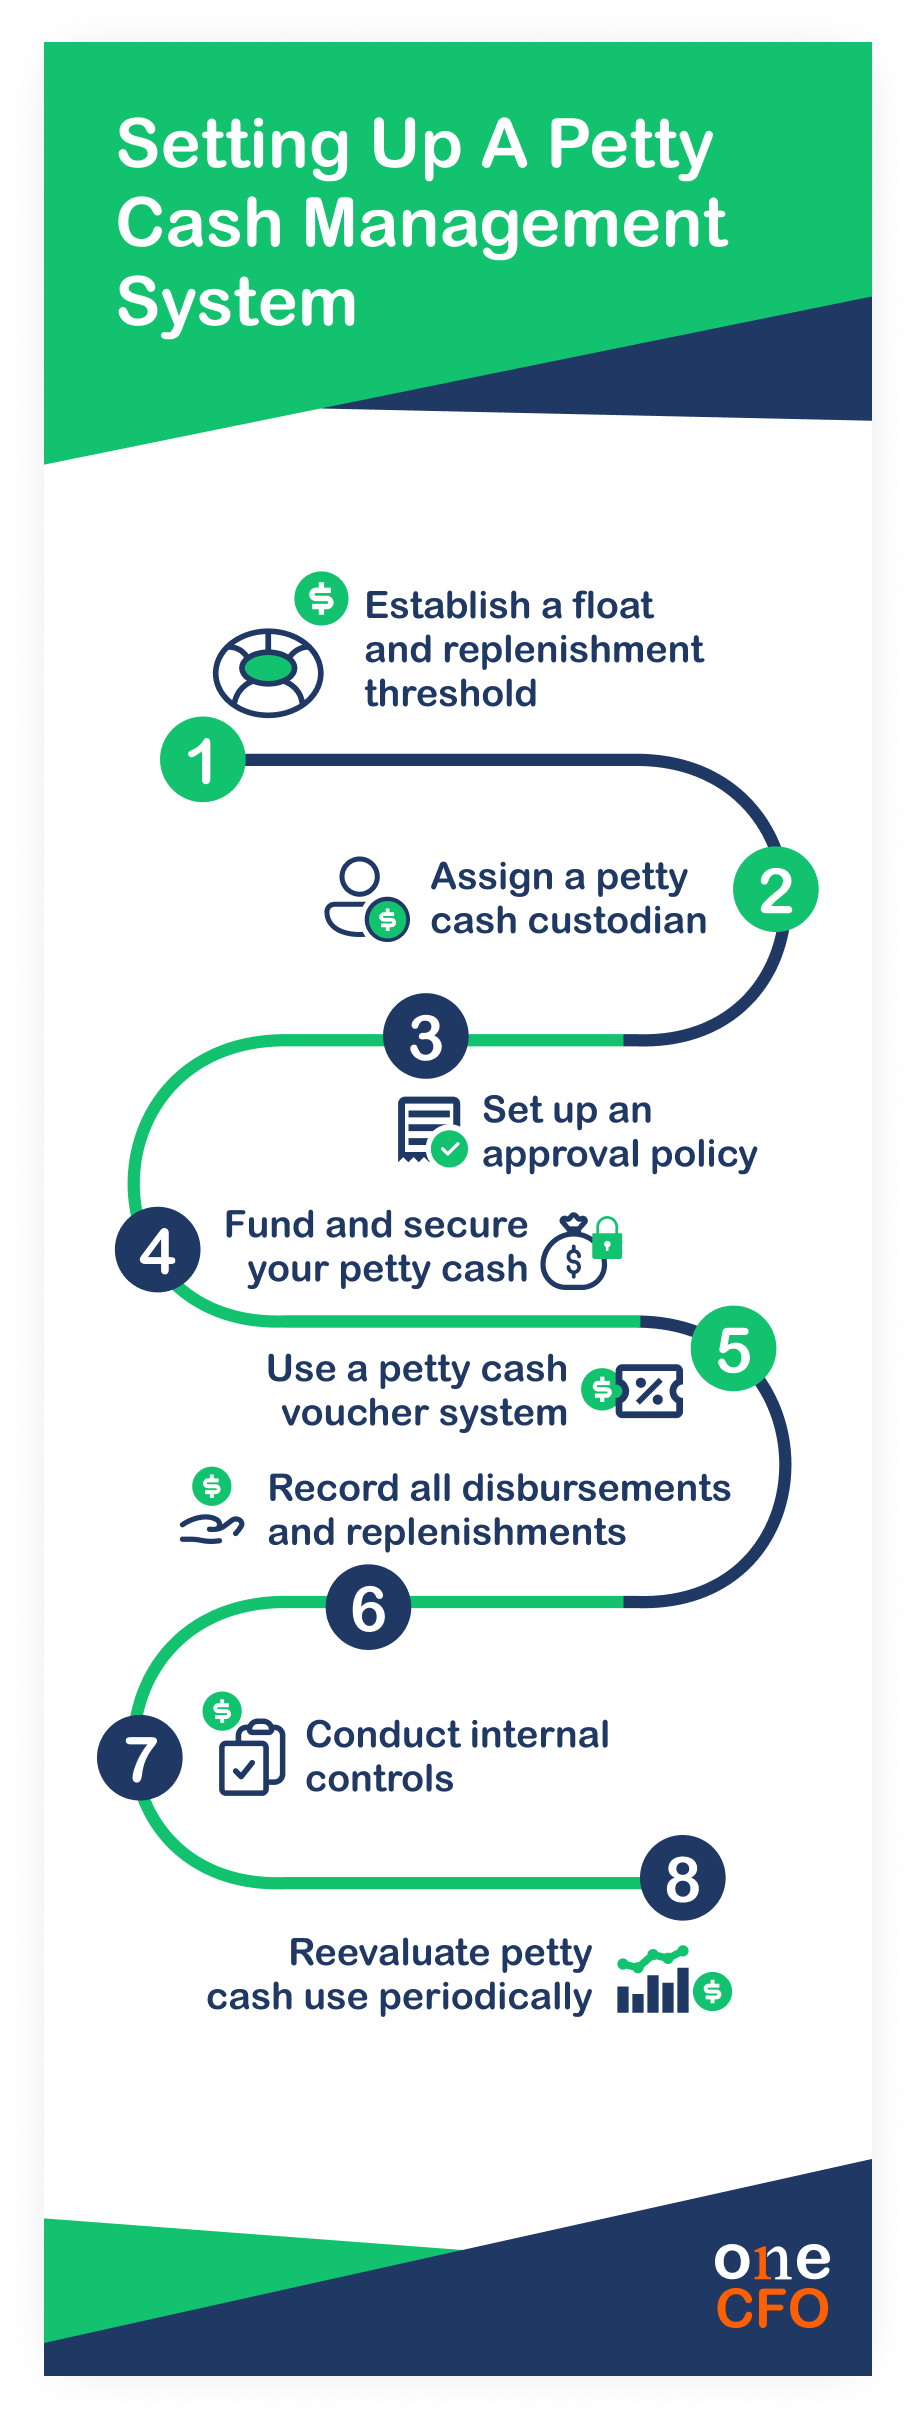 How to setup Small Business Petty Cash Management